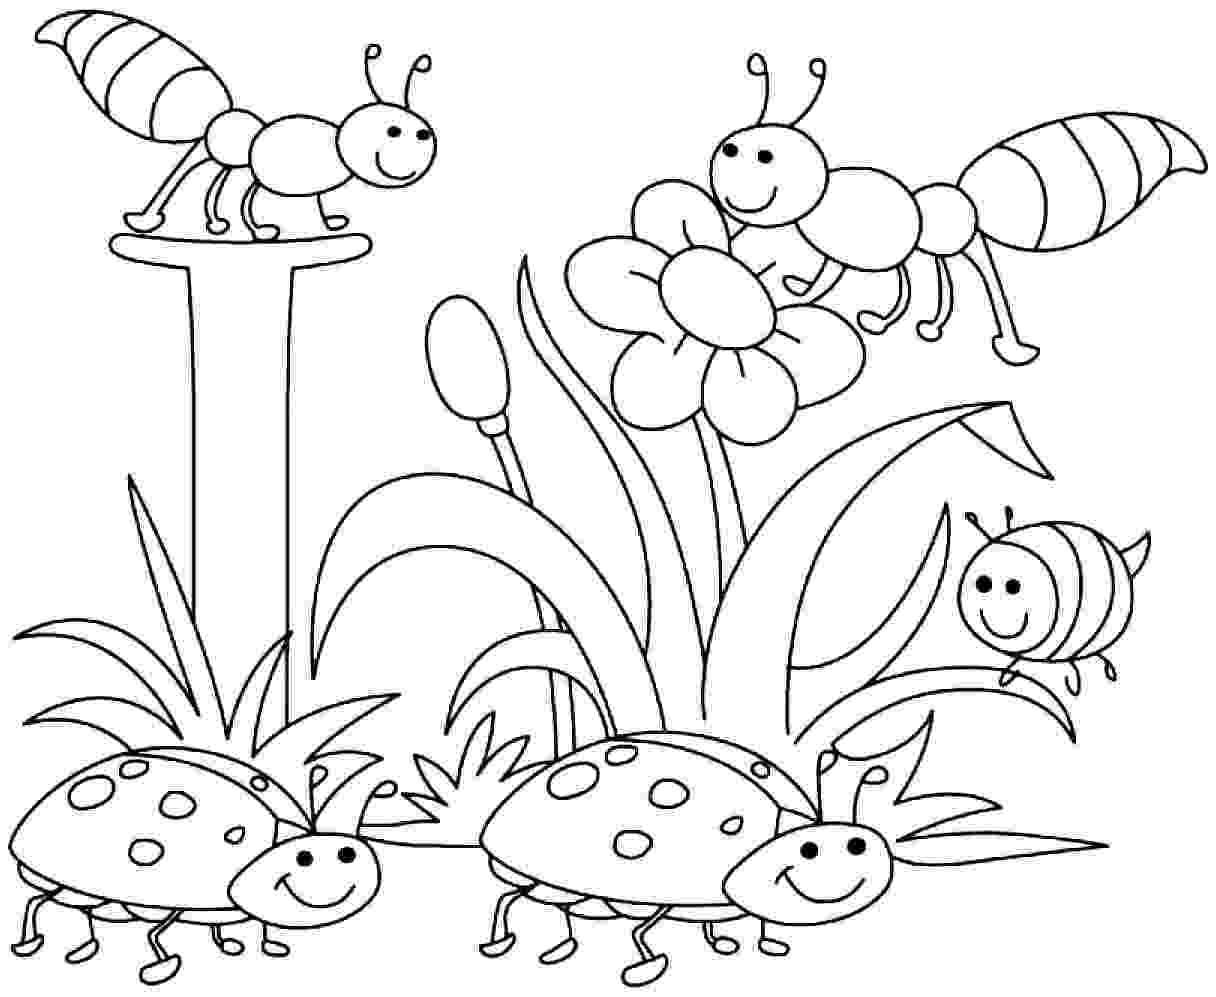 free printable coloring pictures of spring printable coloring pages spring 22106 spring coloring printable free coloring of pictures spring 